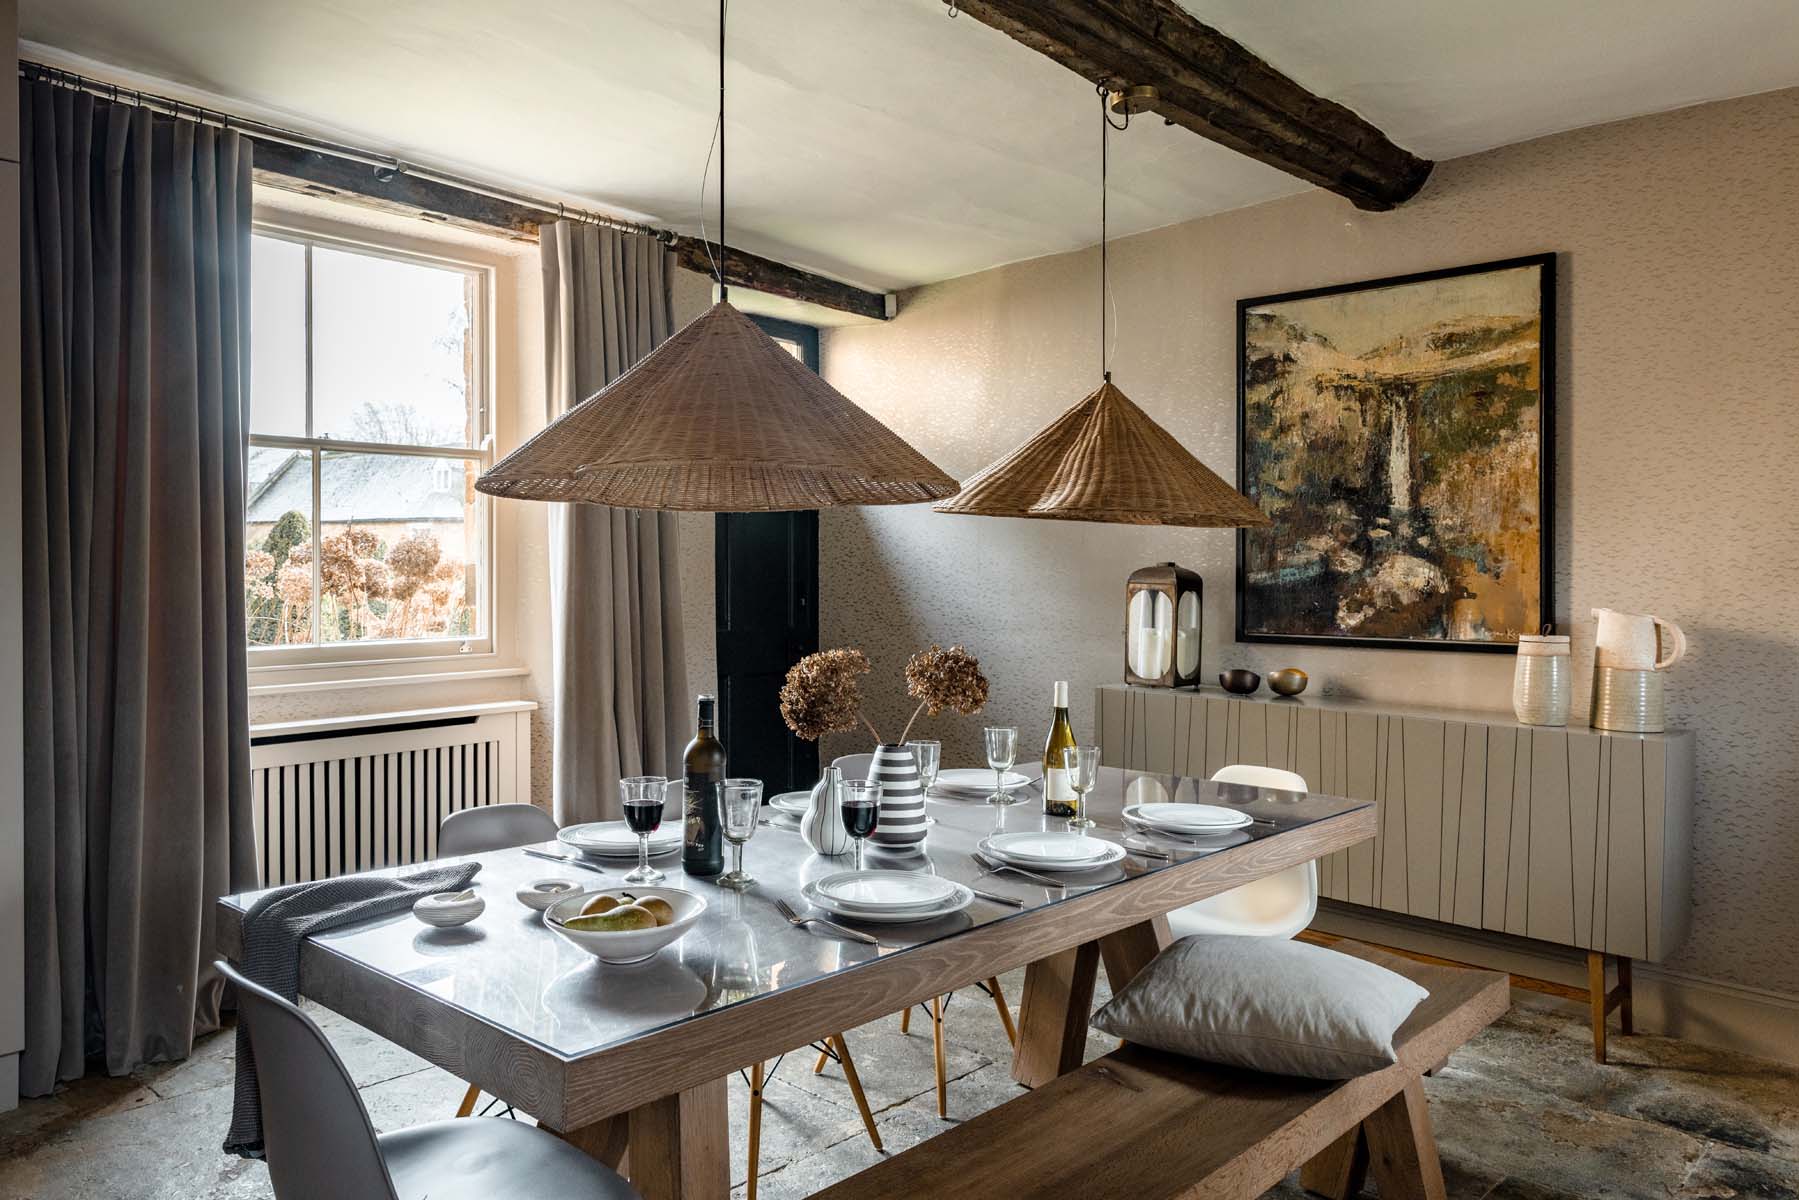 Dining table oak beams, hanging rattan lampshades, artwork and modern chairs